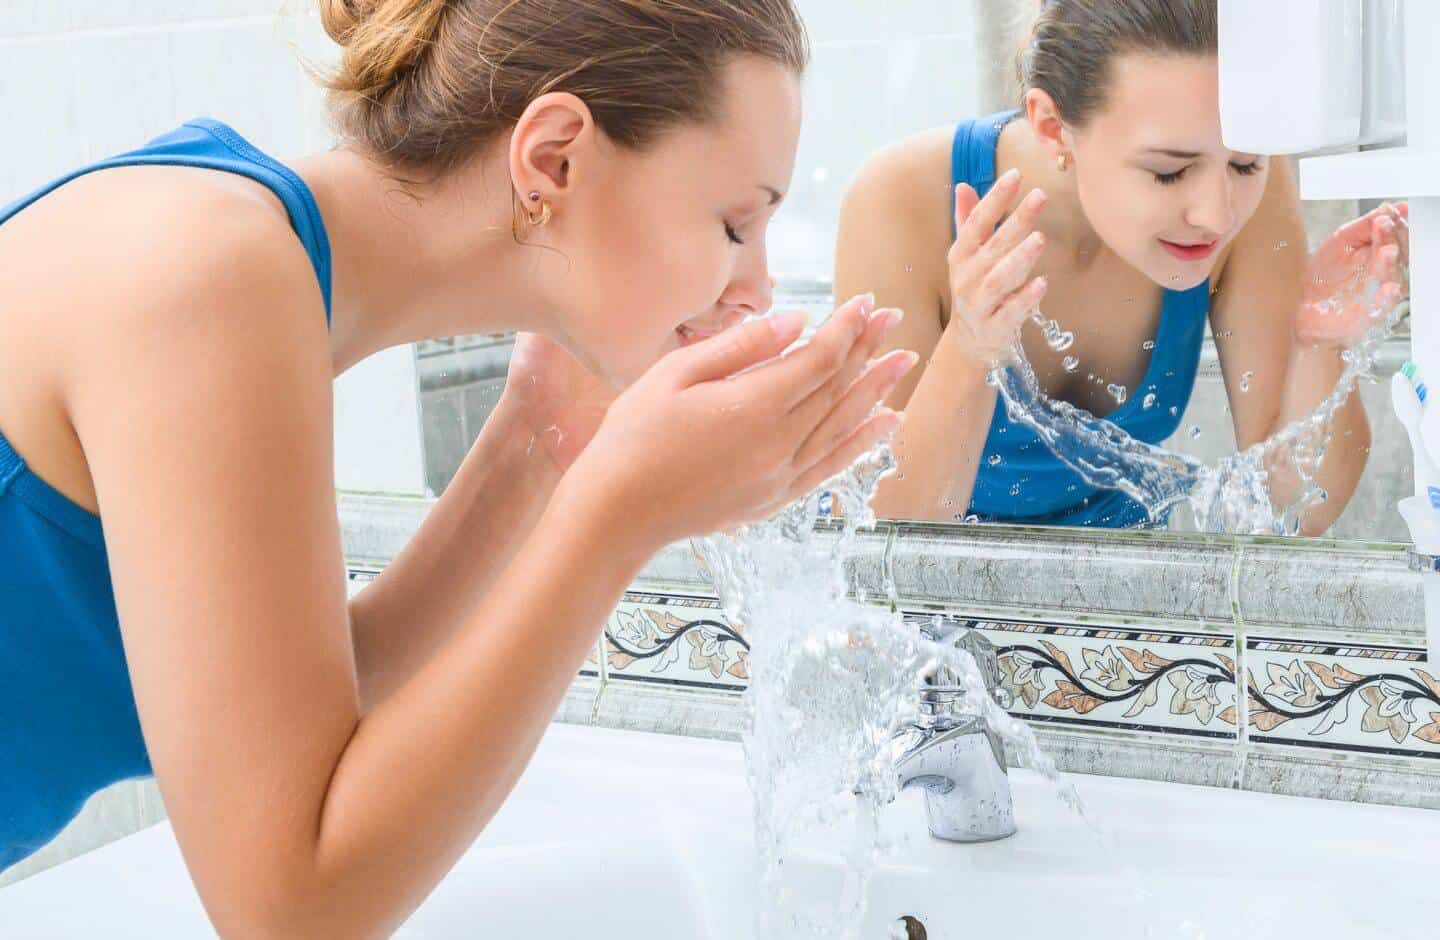 Woman cleaning face with softer, healthier water from a home water softener system